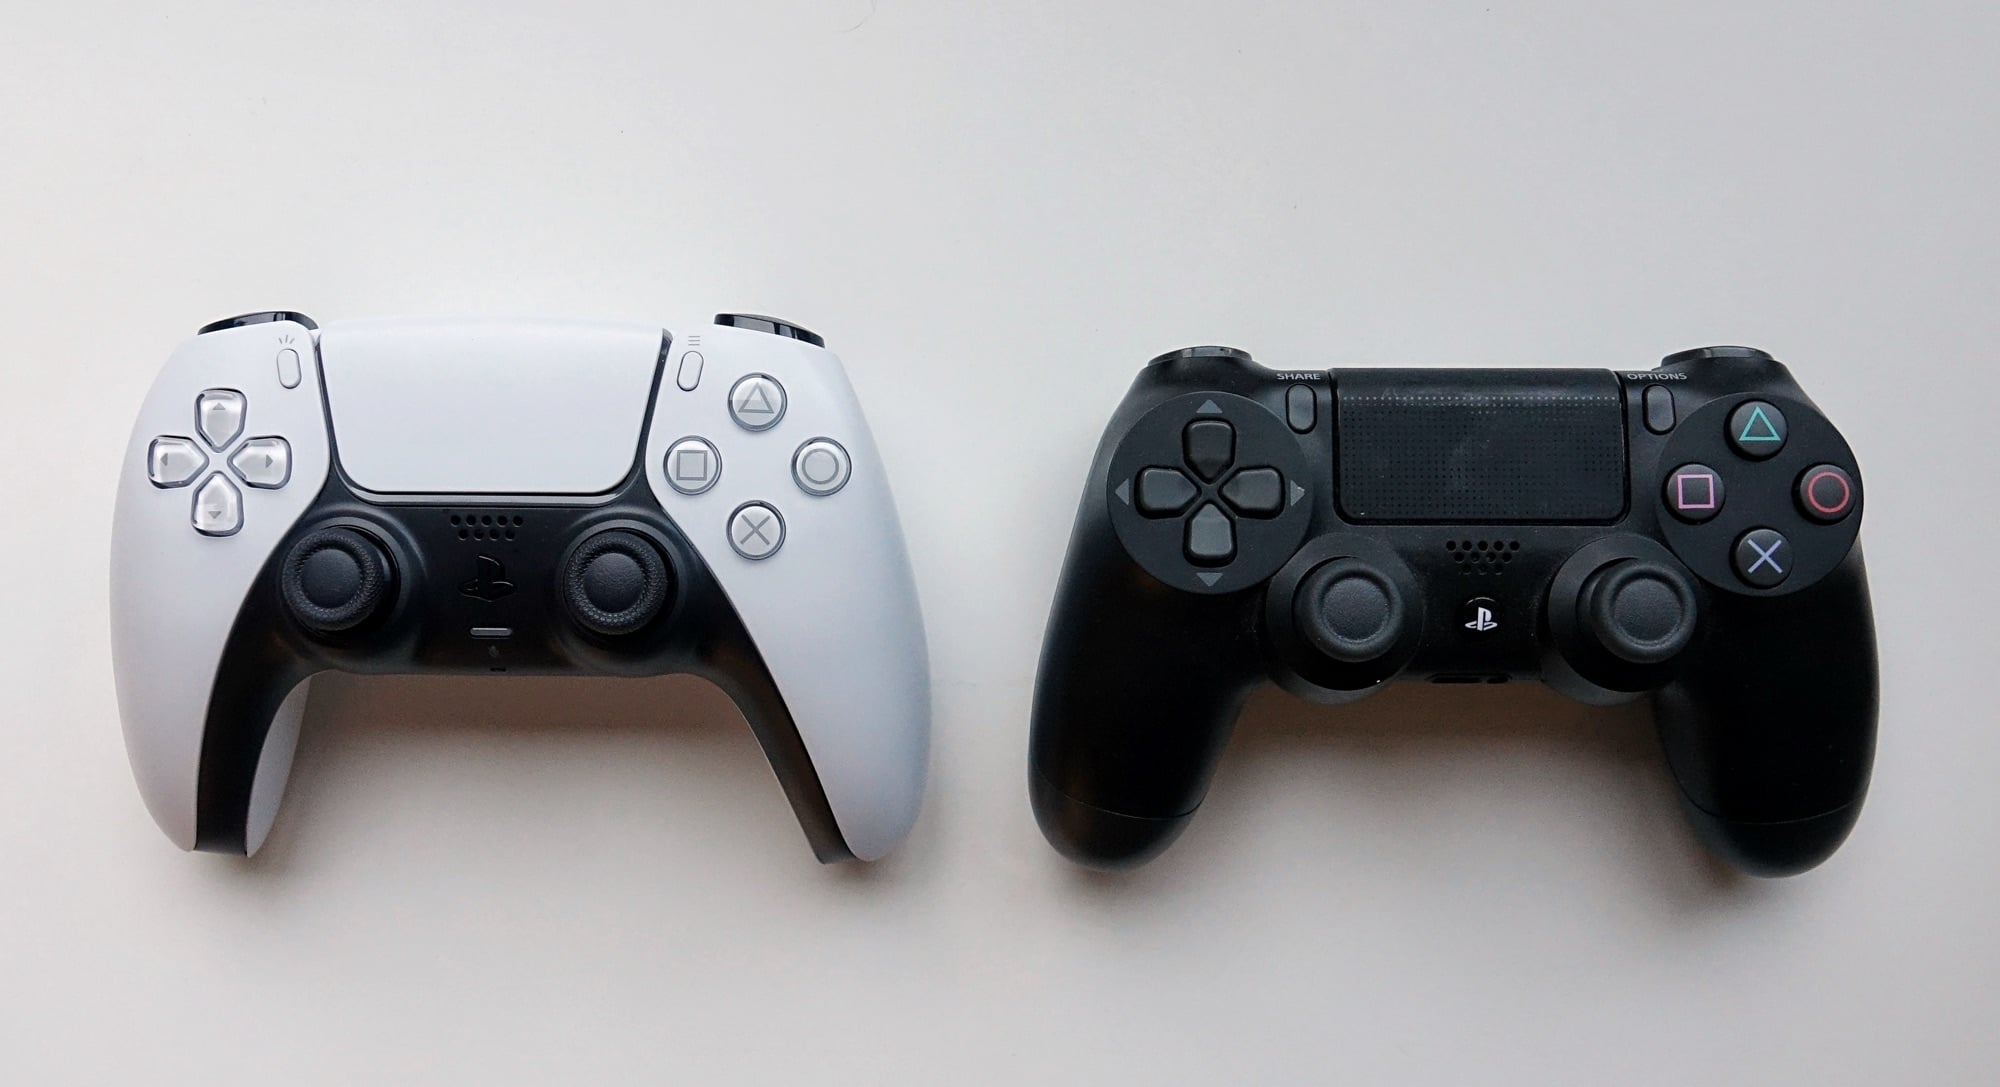 A PS5 controller (left) and a PS4 controller (right)